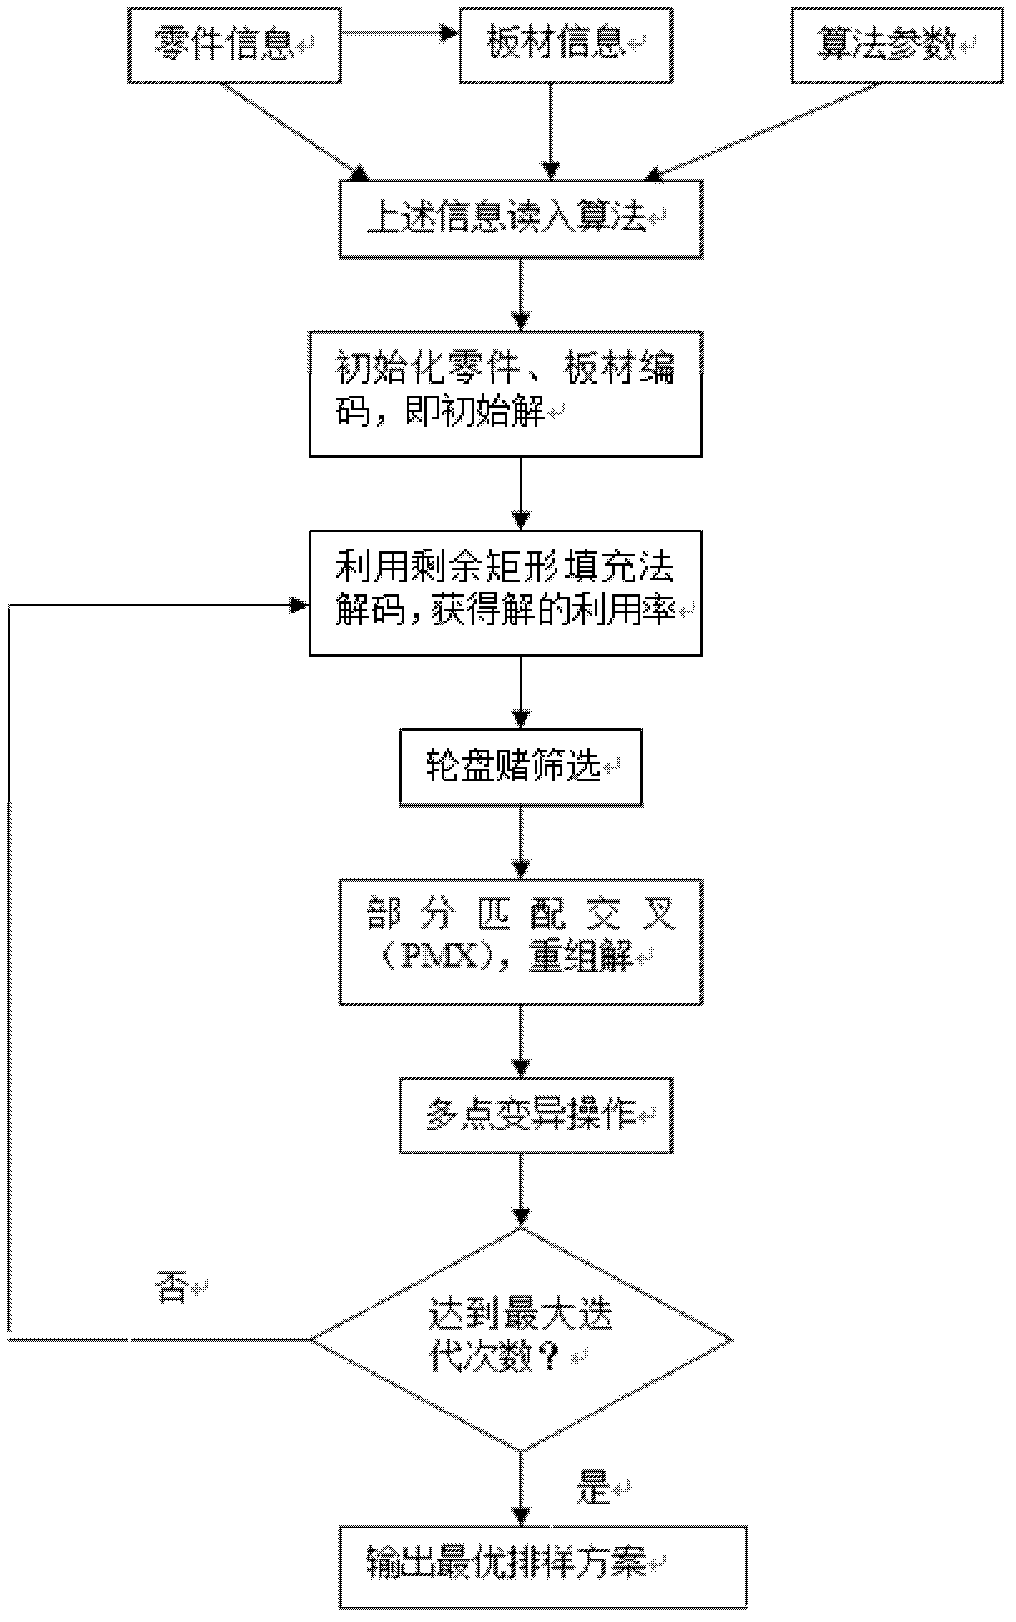 Automatic stock layout method of insulated paper board